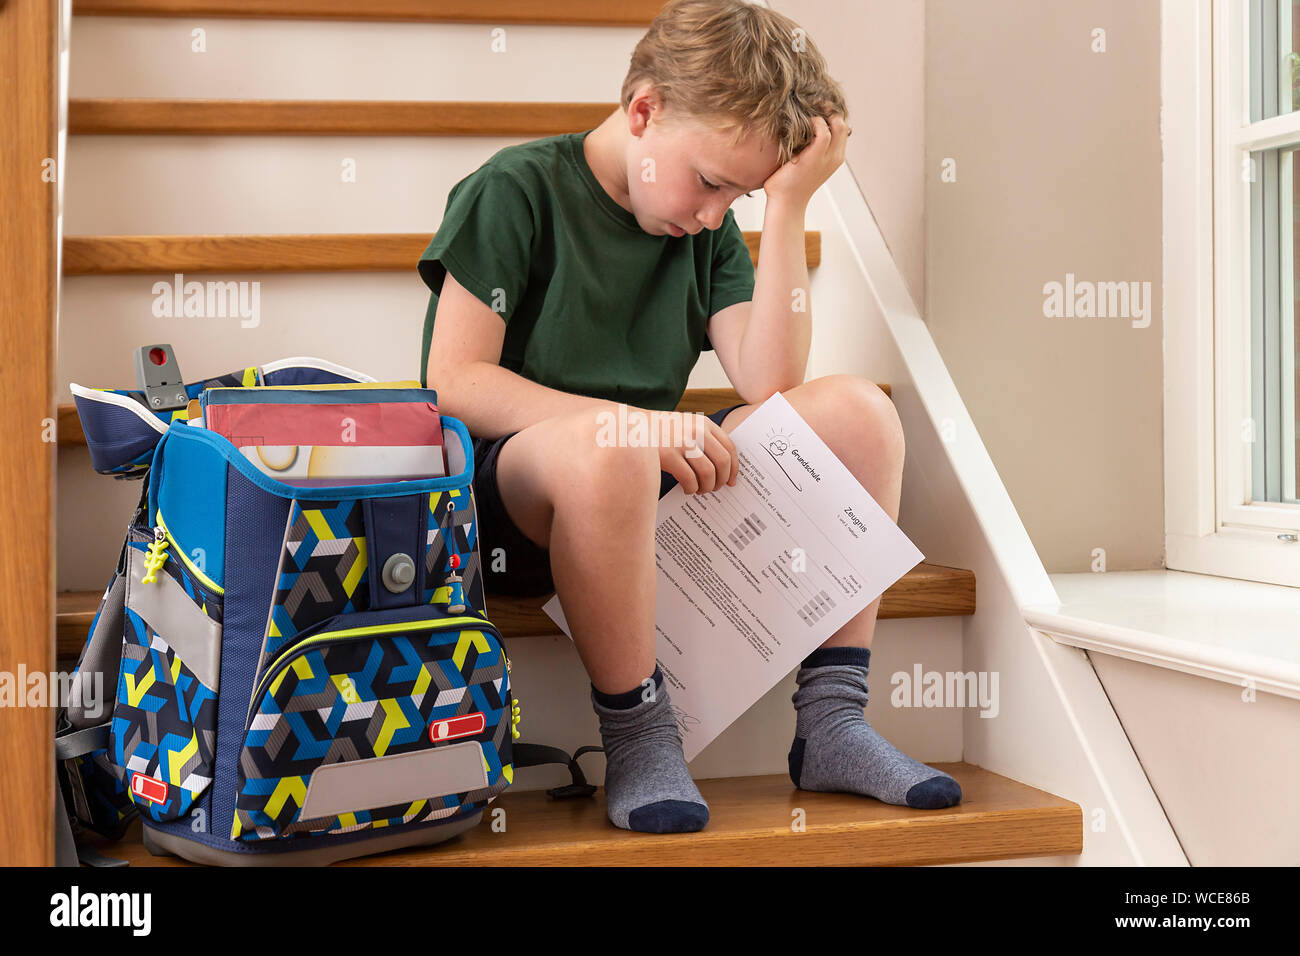 Disppointed boy, 8 years, at home with his primary school report. Stock Photo